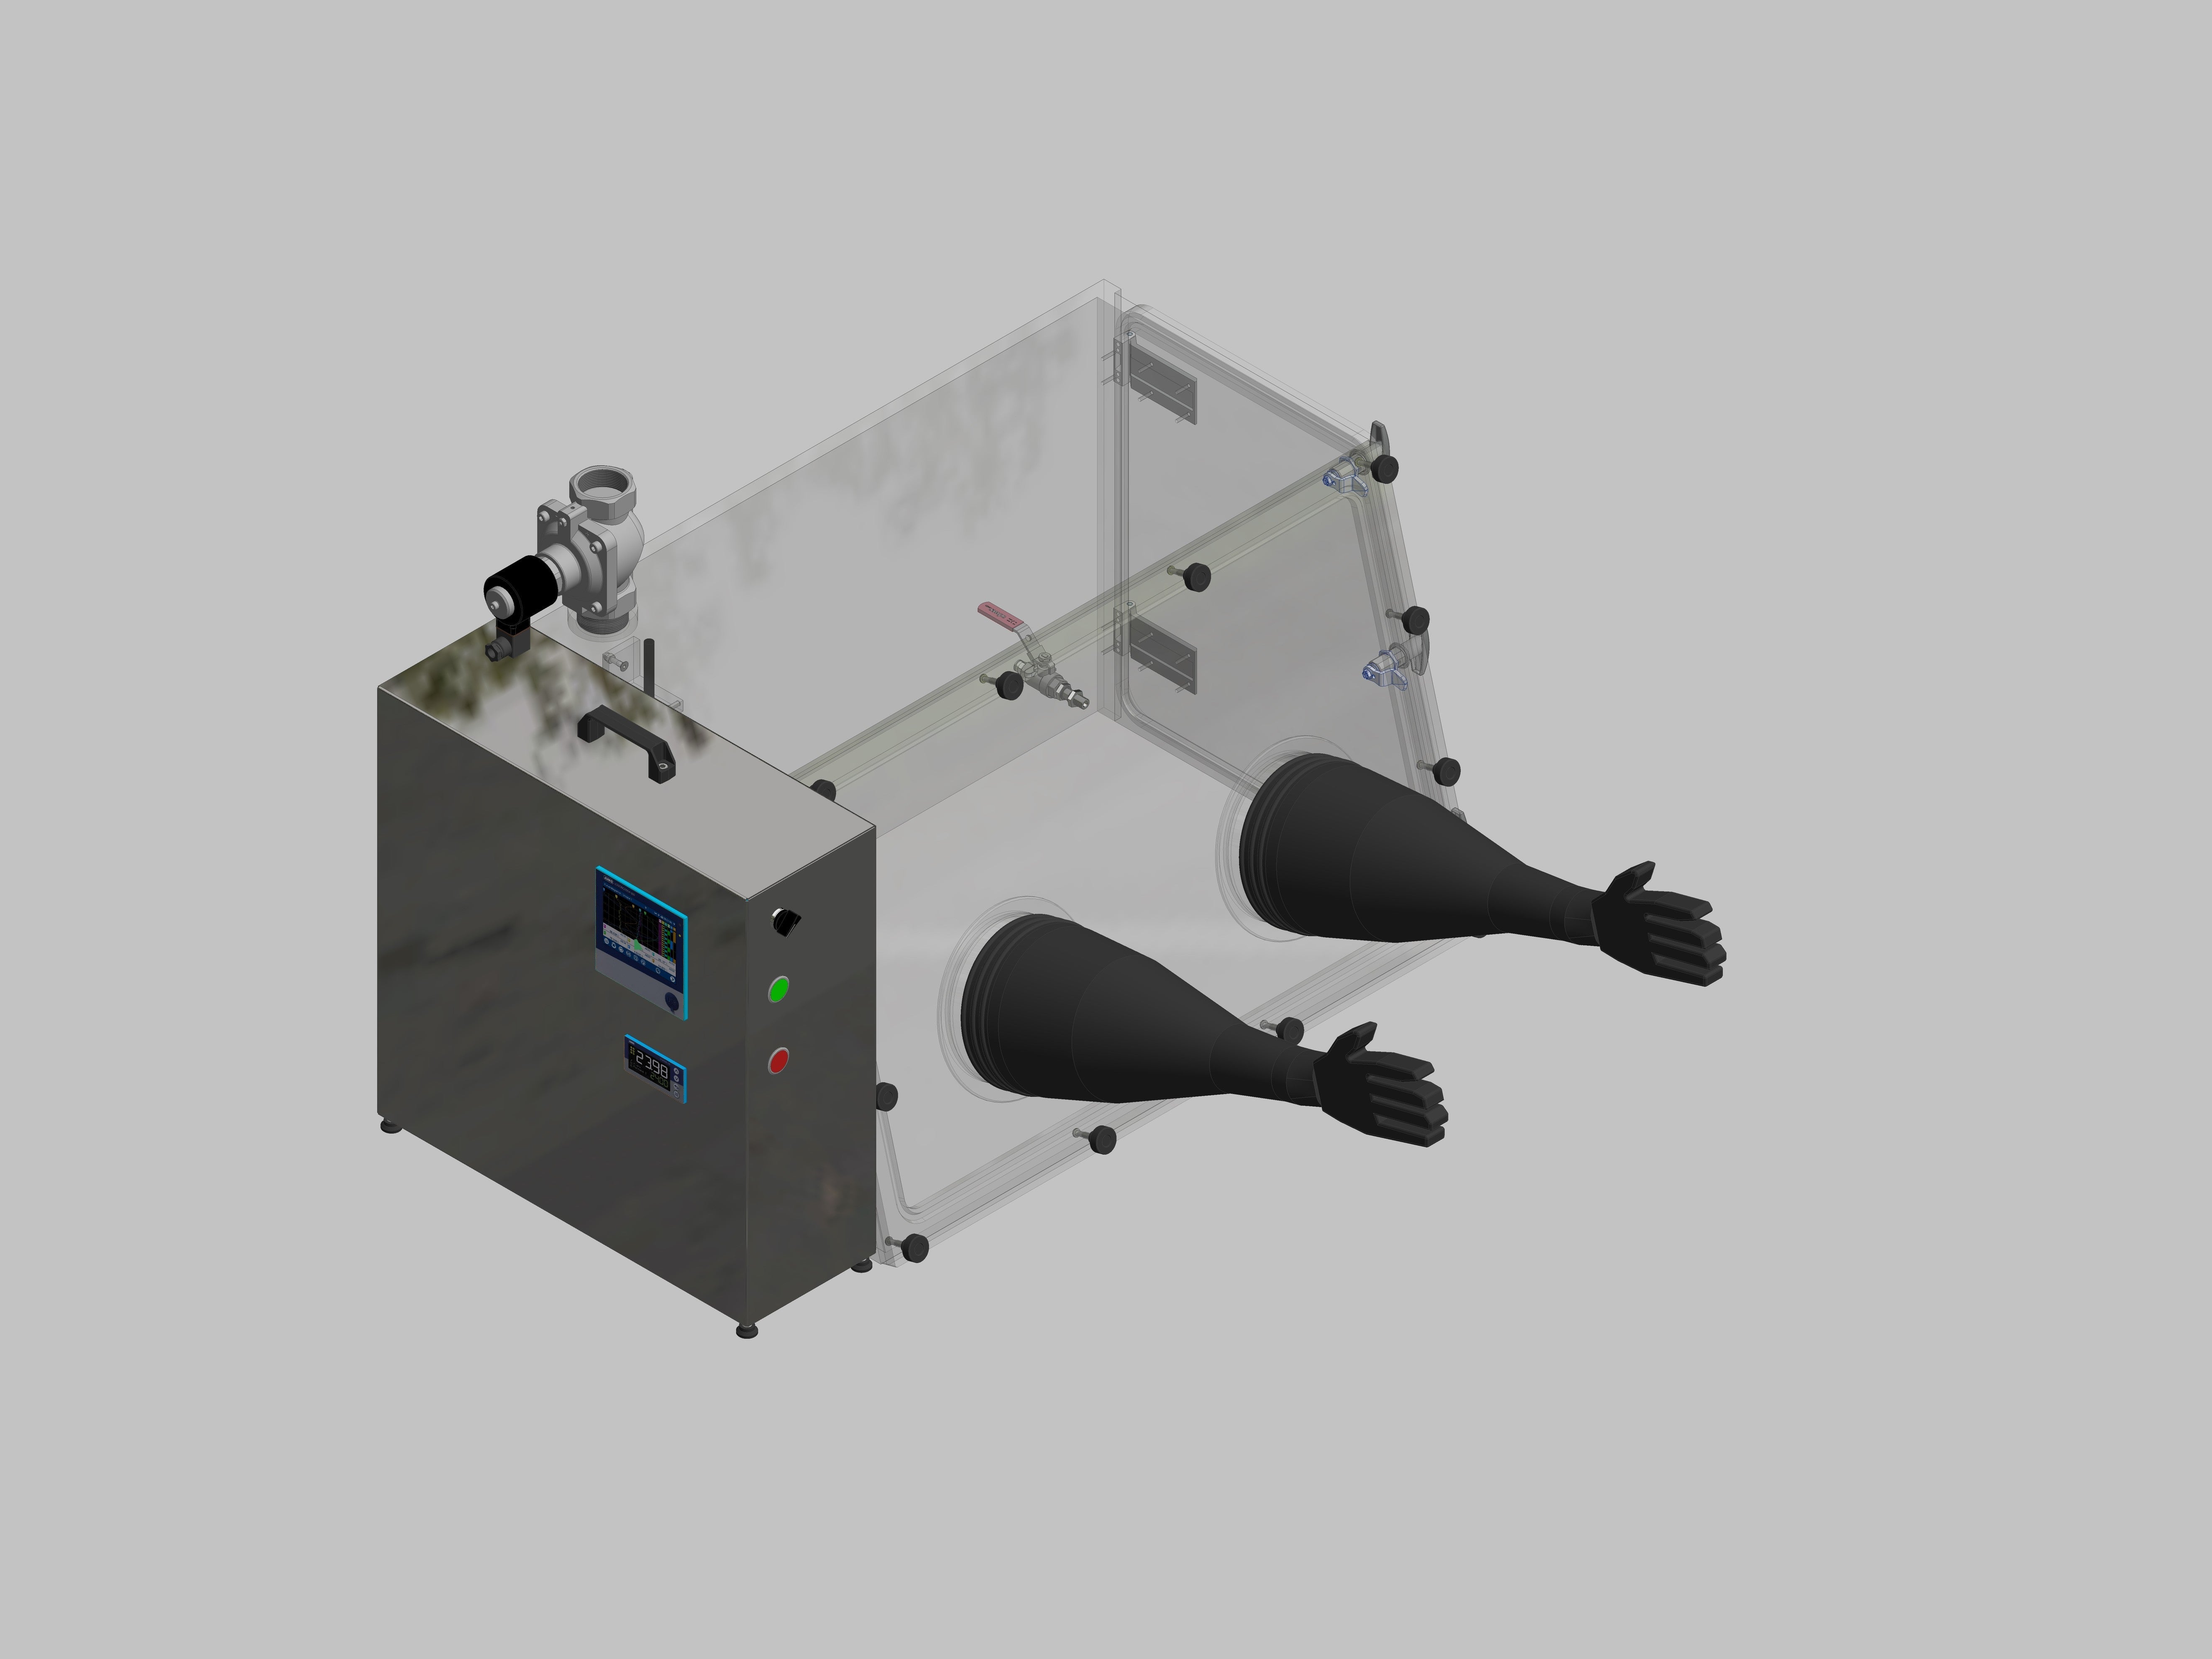 Glovebox made of acrylic&gt; Gas filling: automatic flushing with pressure control, front design: removable, side design: hinged doors, control: humidity controller with data logger